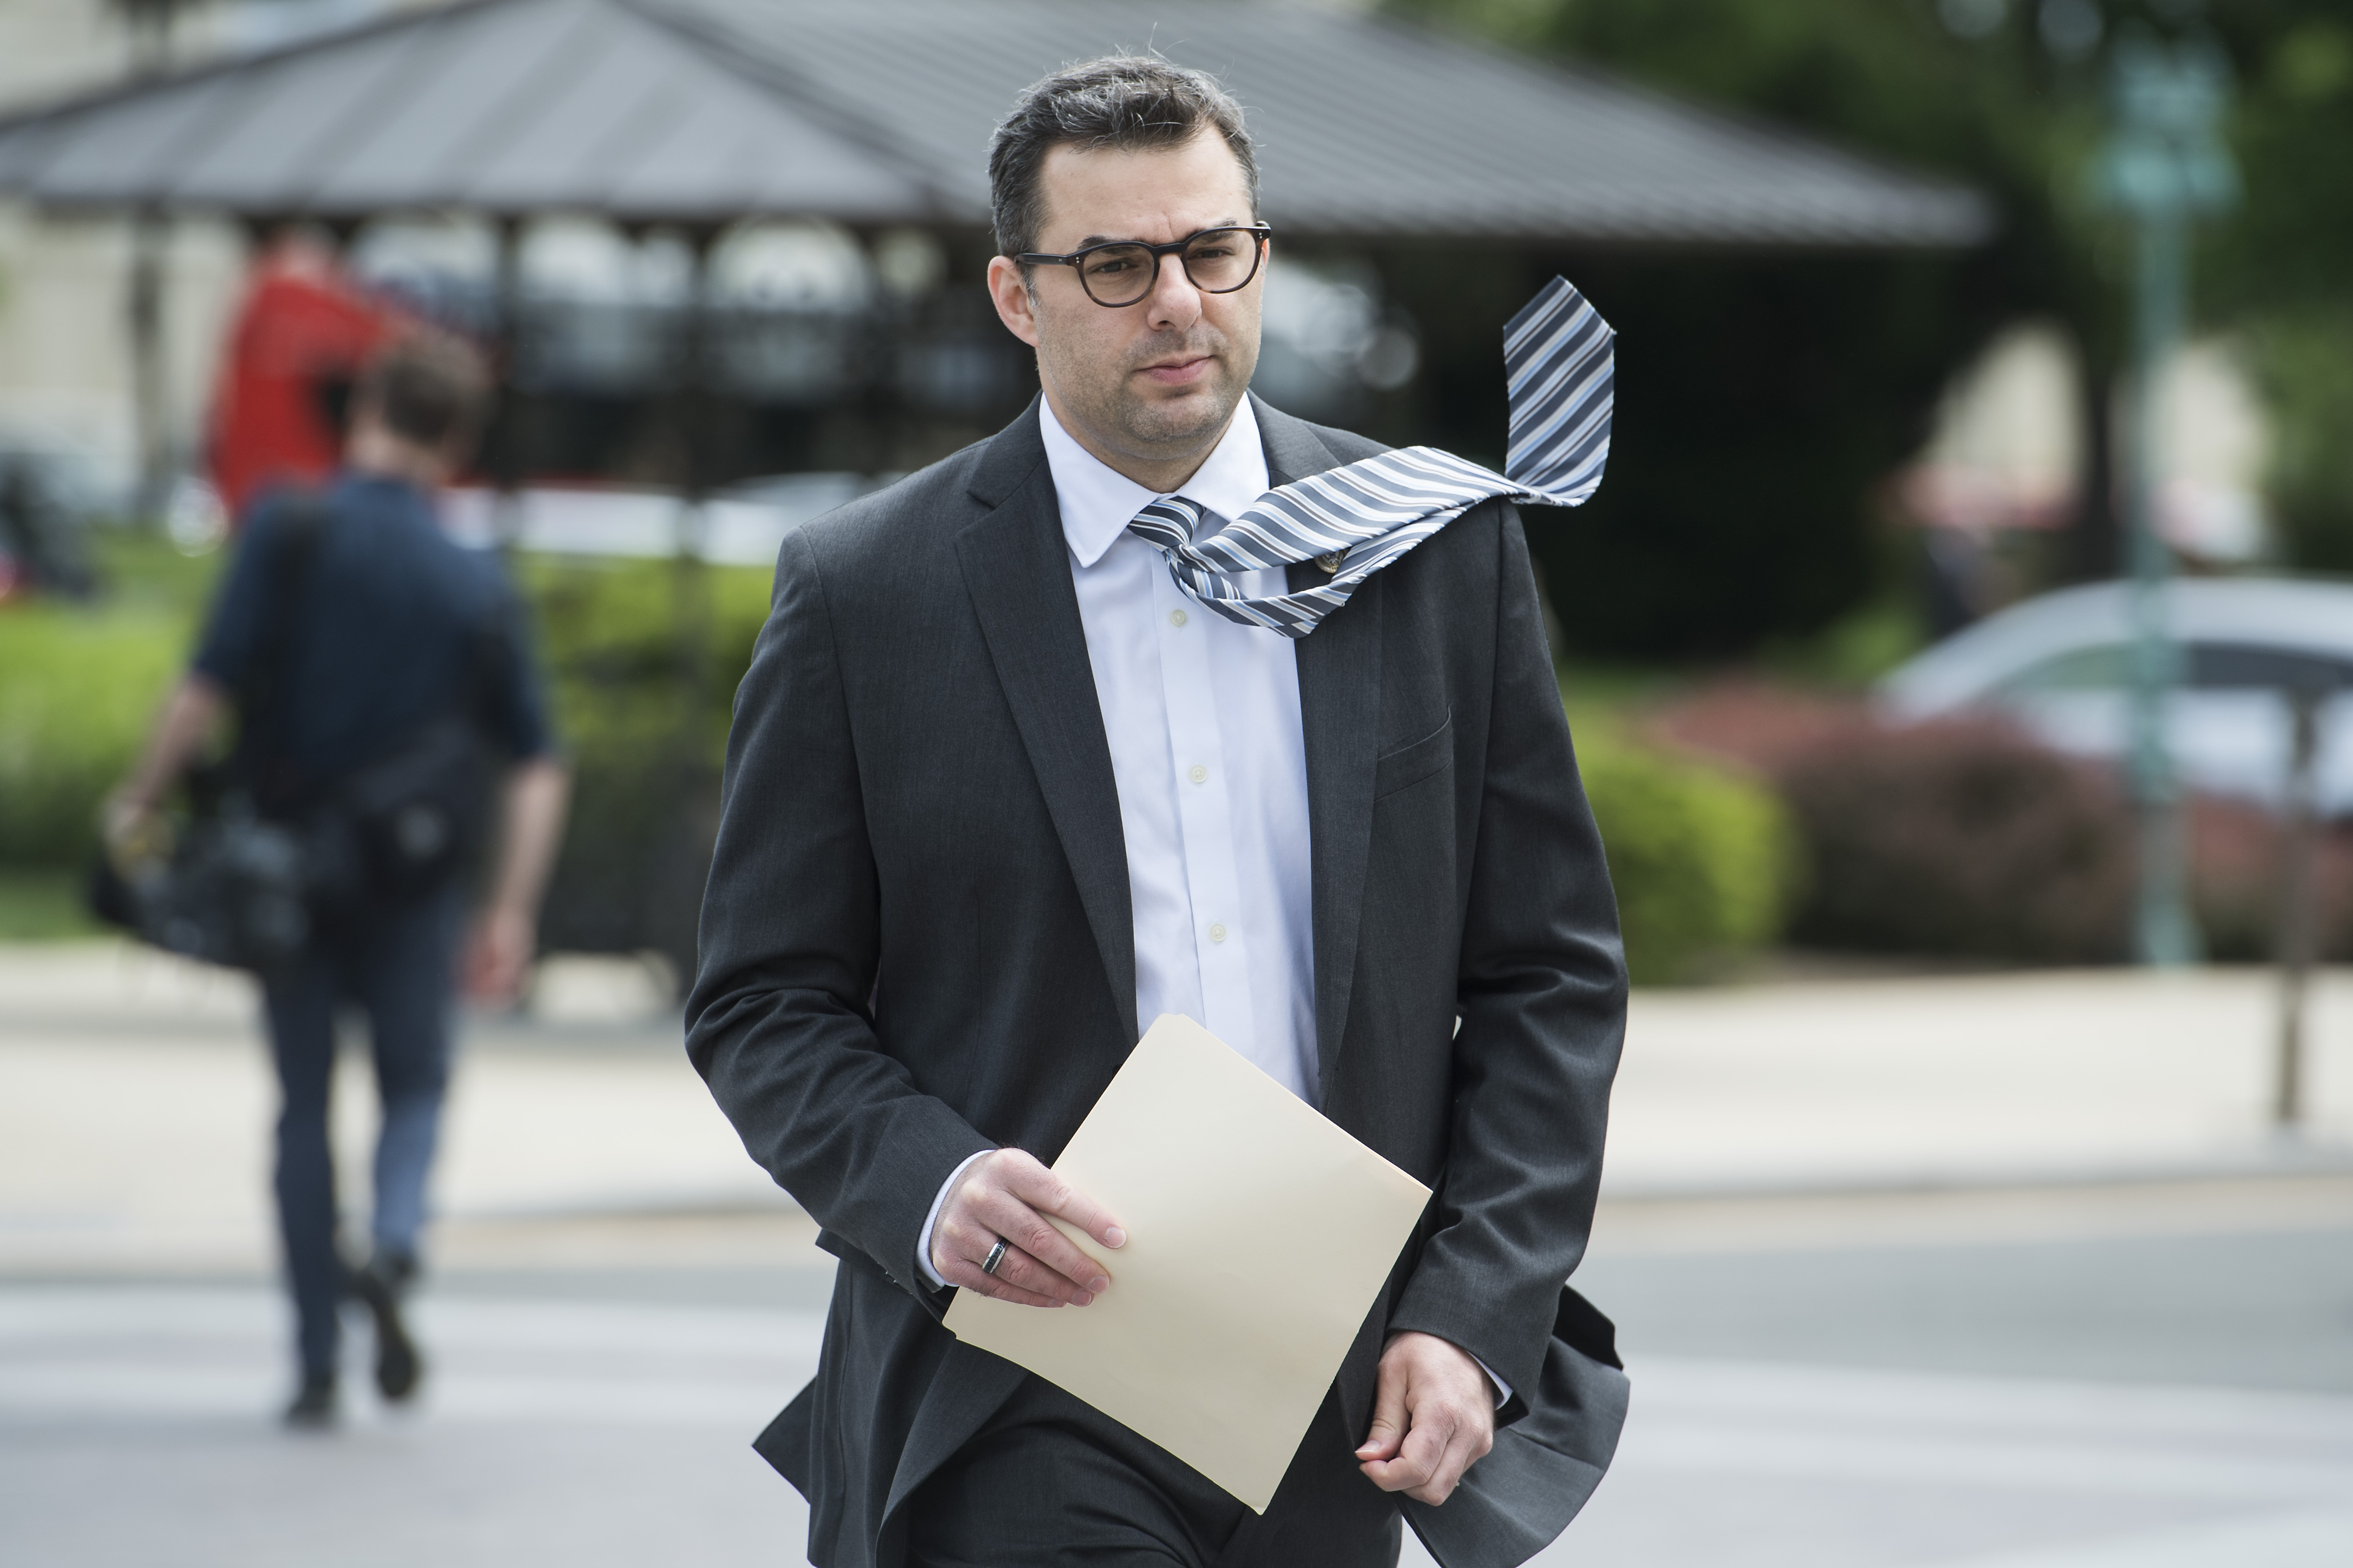 Rep. Justin Amash, R-Mich., arrives to the Capitol before the House passed the Republicans' bill to repeal and replace the Affordable Care Act on May 4, 2017. (Tom Williams/CQ Roll Call)